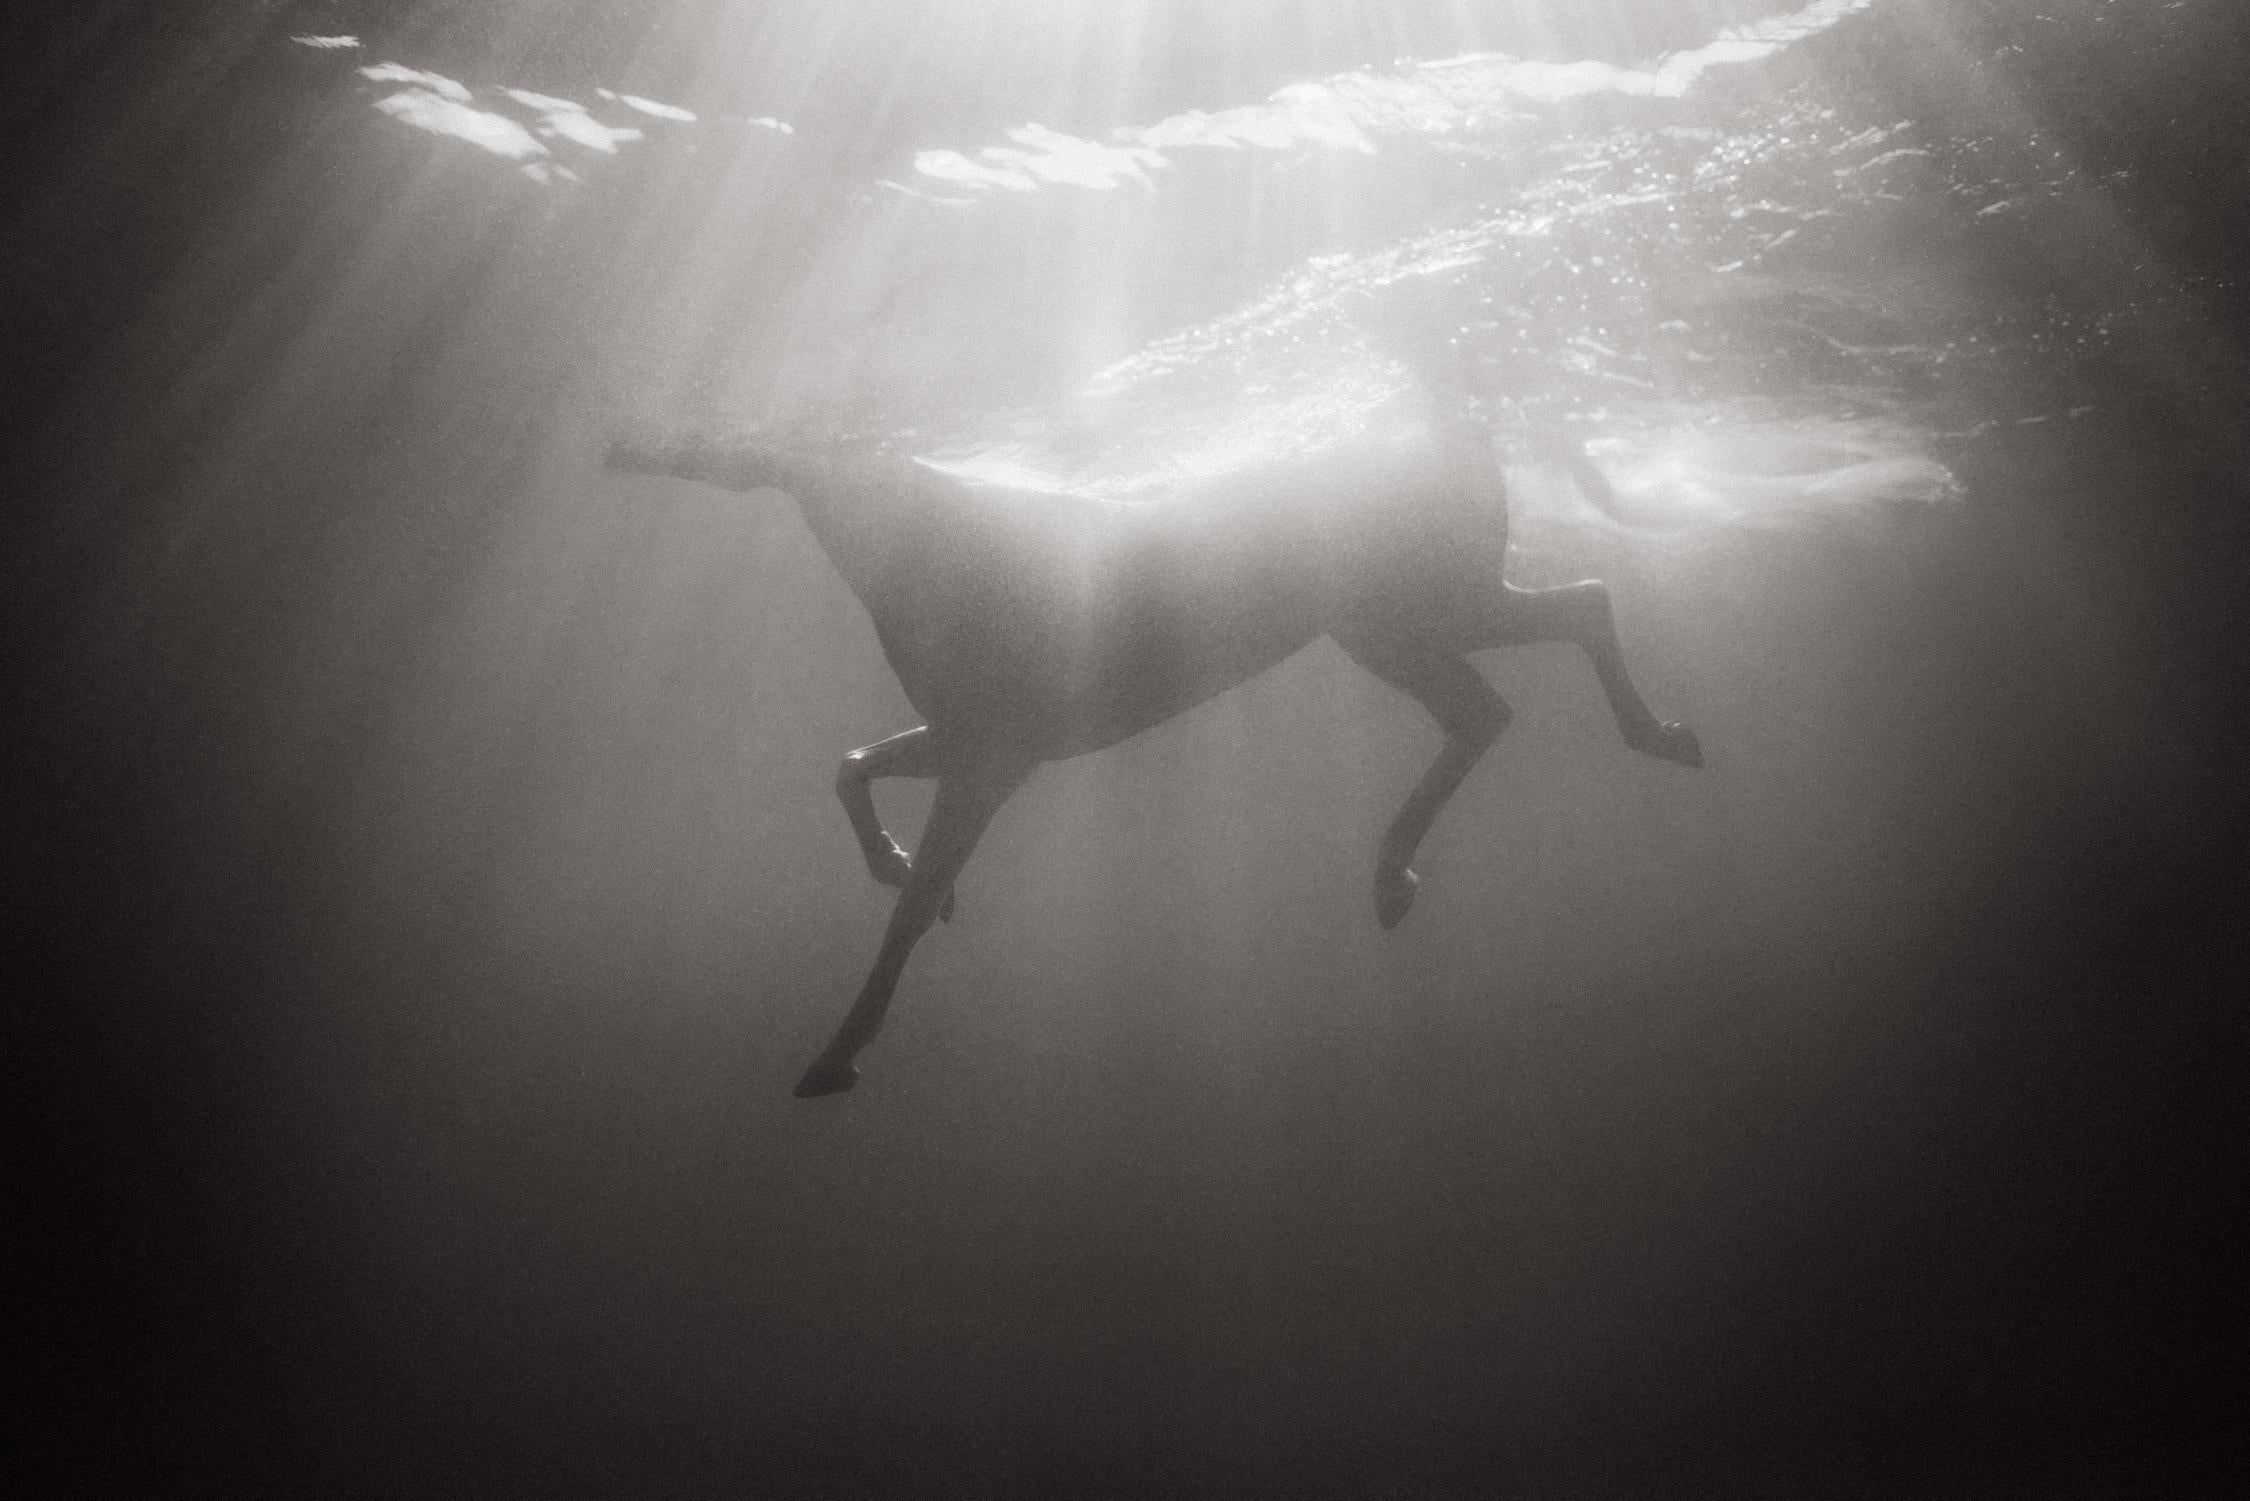 Drew Doggett Black and White Photograph - All-White Horse Swimming Underwater with Surreal Light, Otherworldly